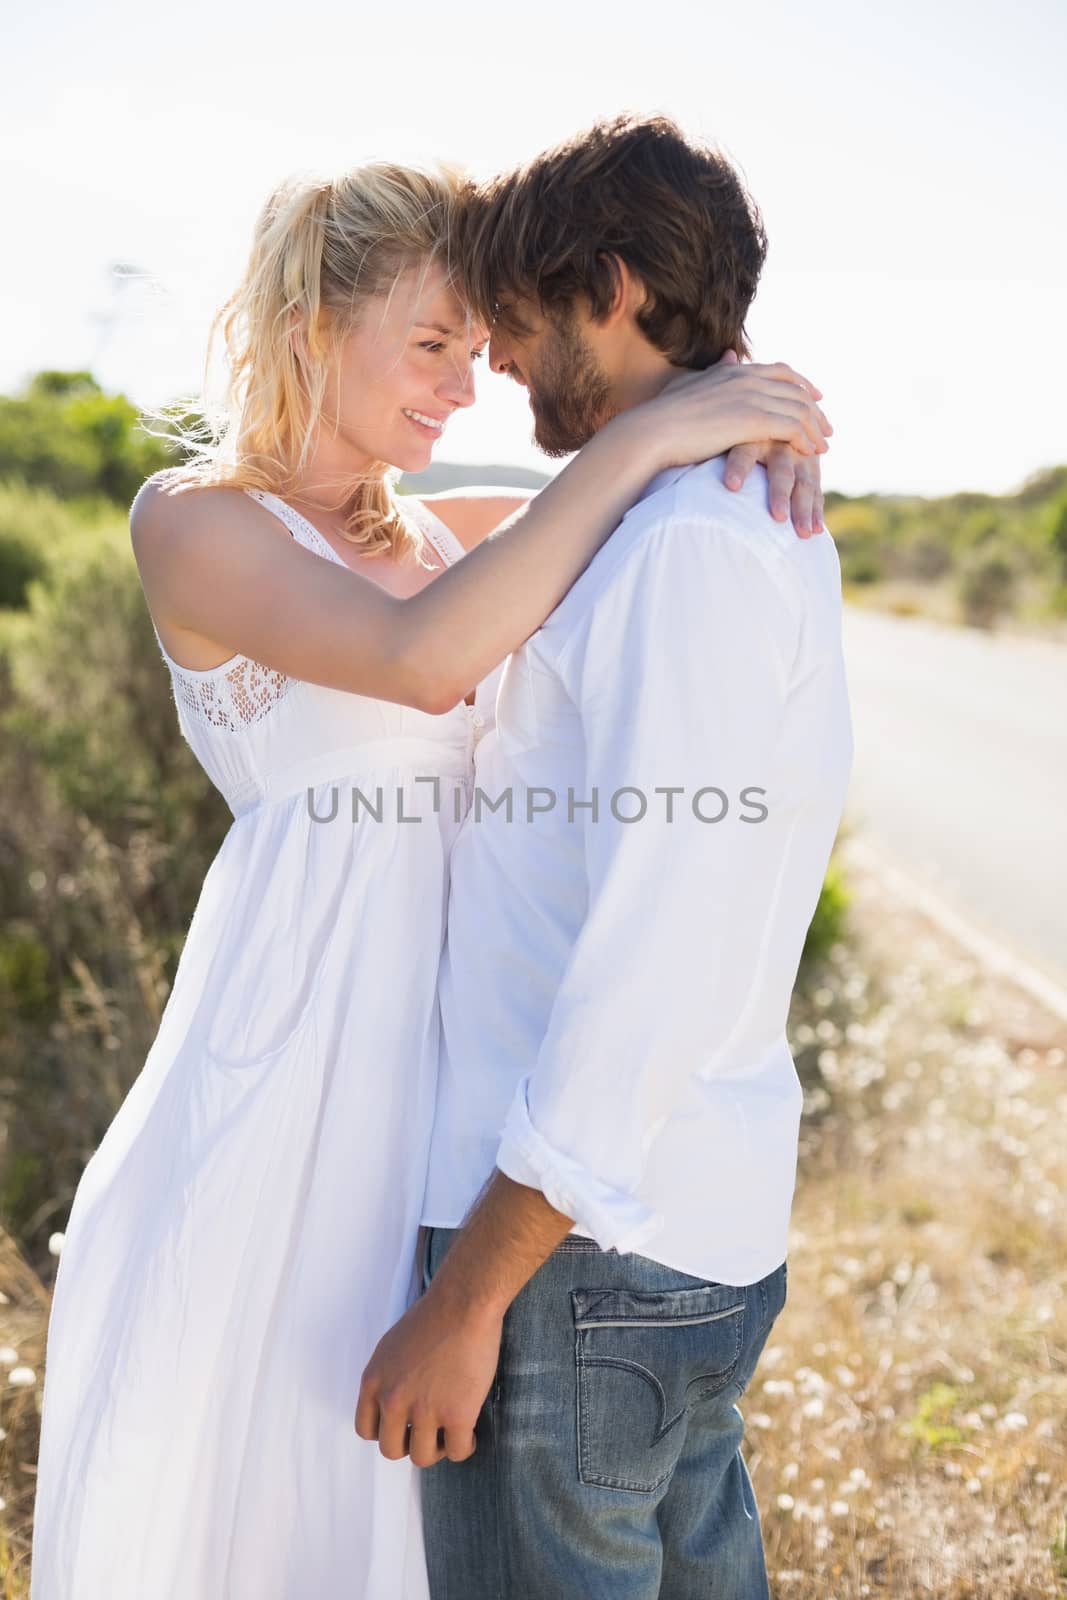 Attractive couple embracing by the road by Wavebreakmedia